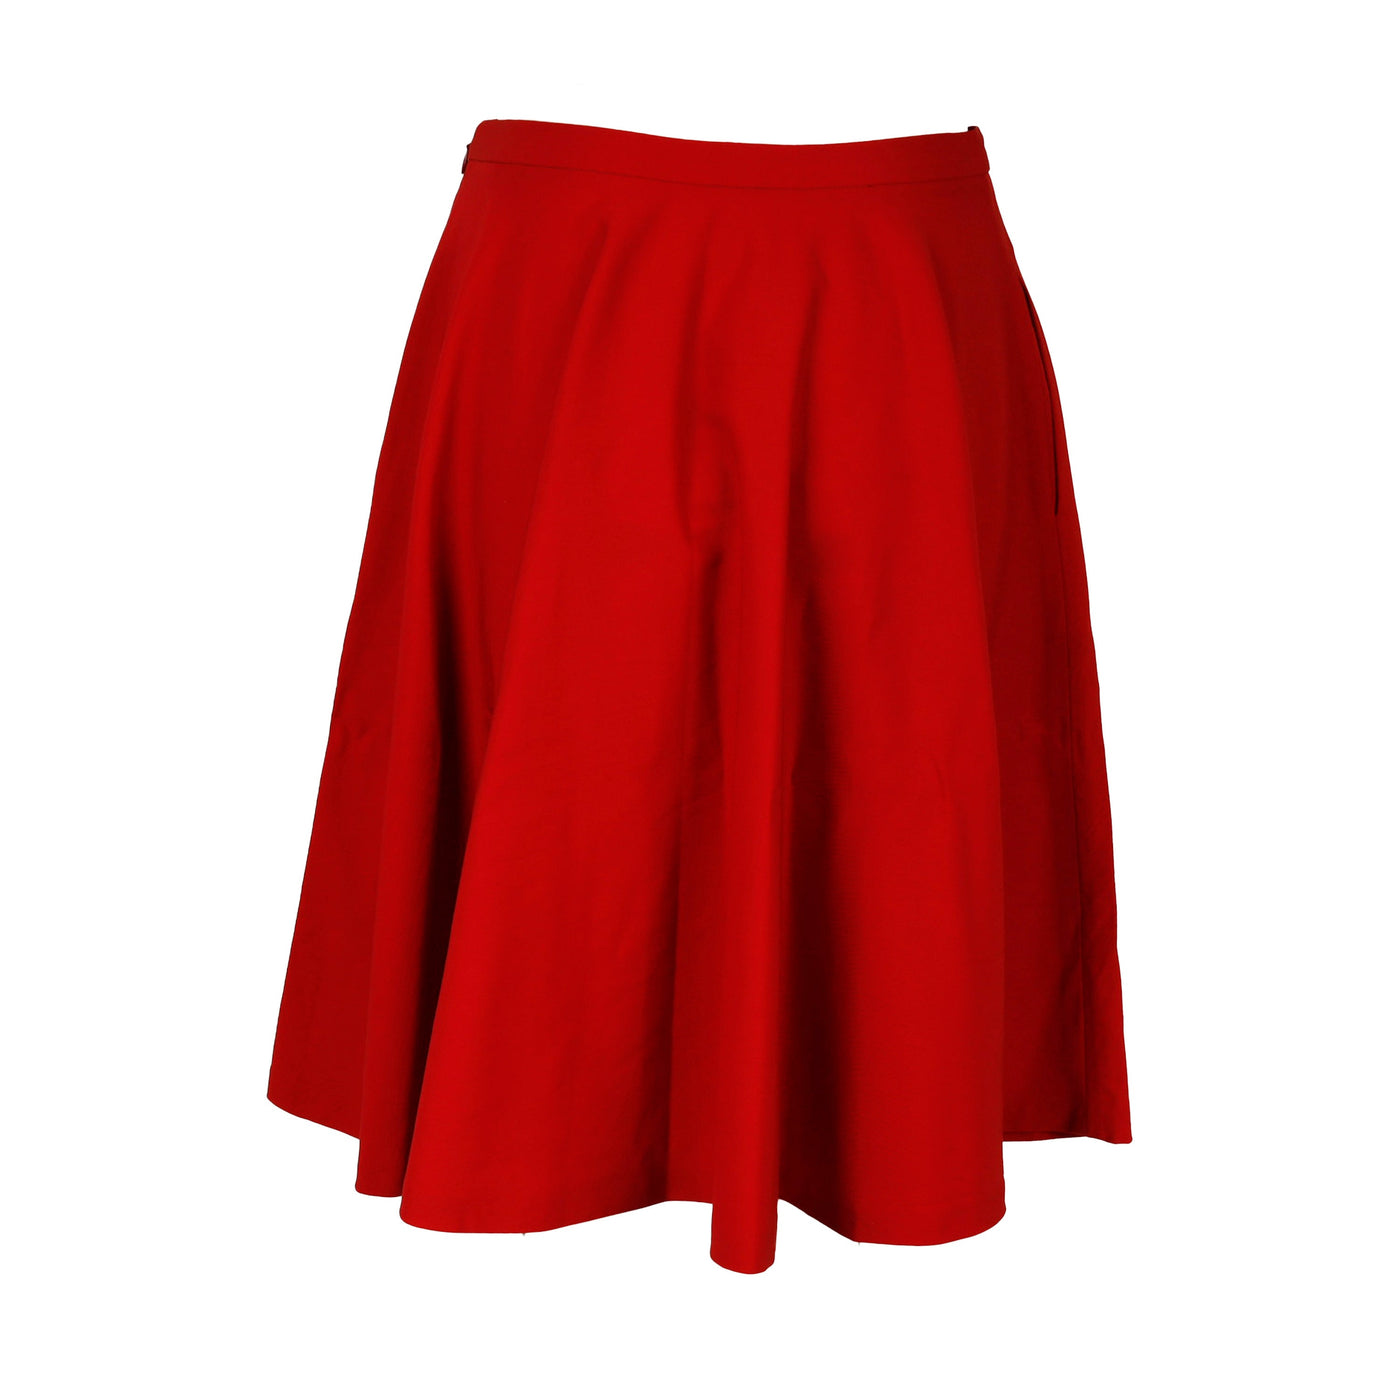 Secondhand Moschino Cheap and Chic Flared Skirt